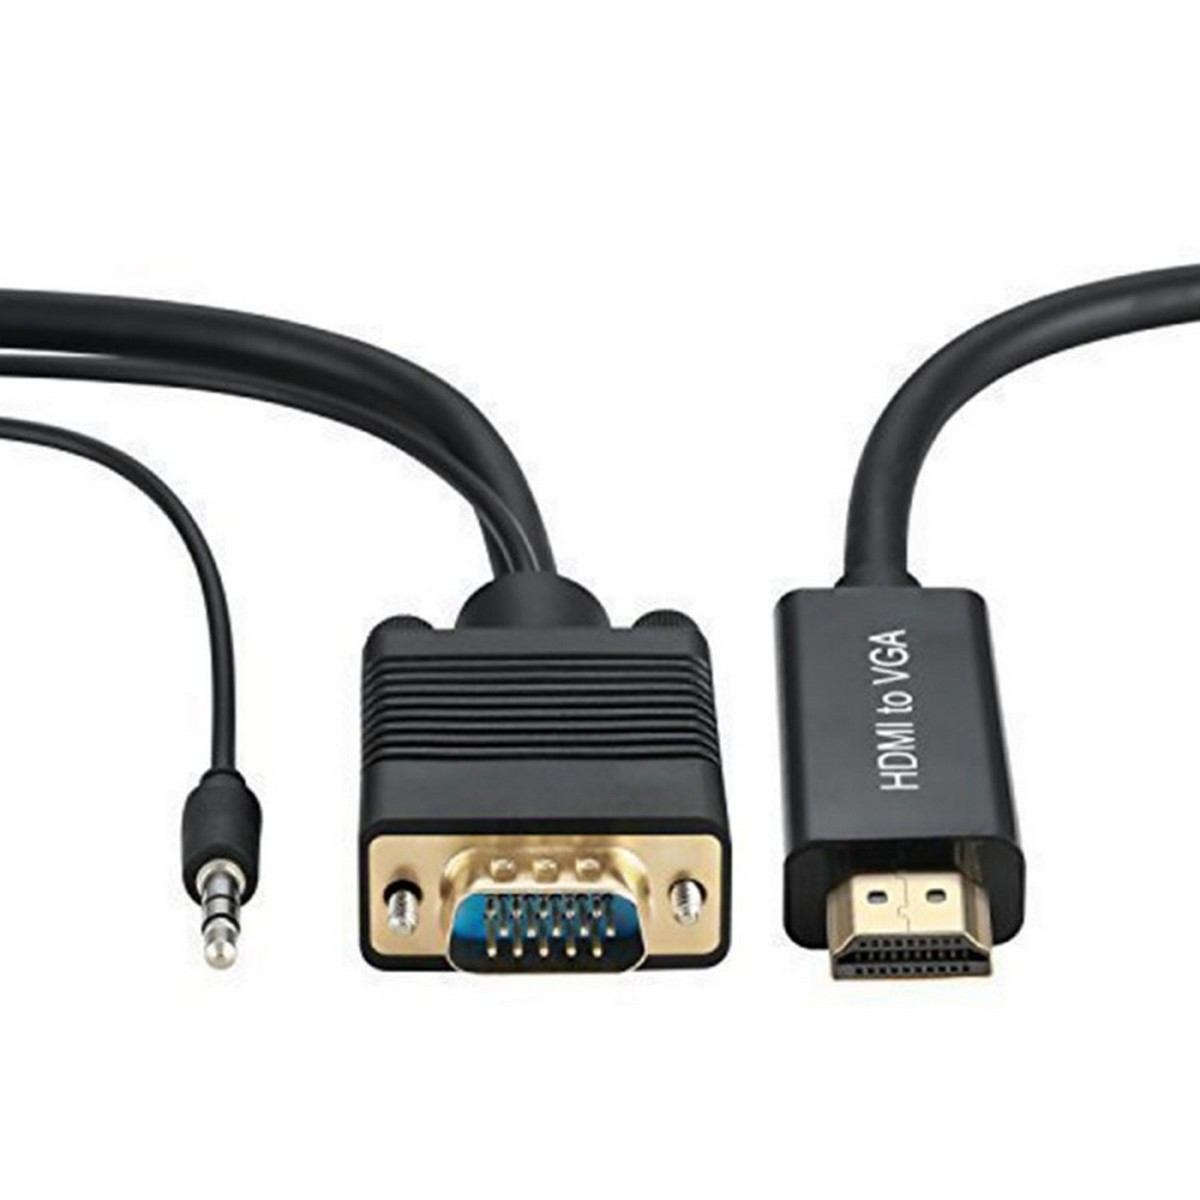 HDMI TO VGA Cable - 1.5 M Net-Power Buy, Best Price in Oman, Muscat, Seeb,  Salalah